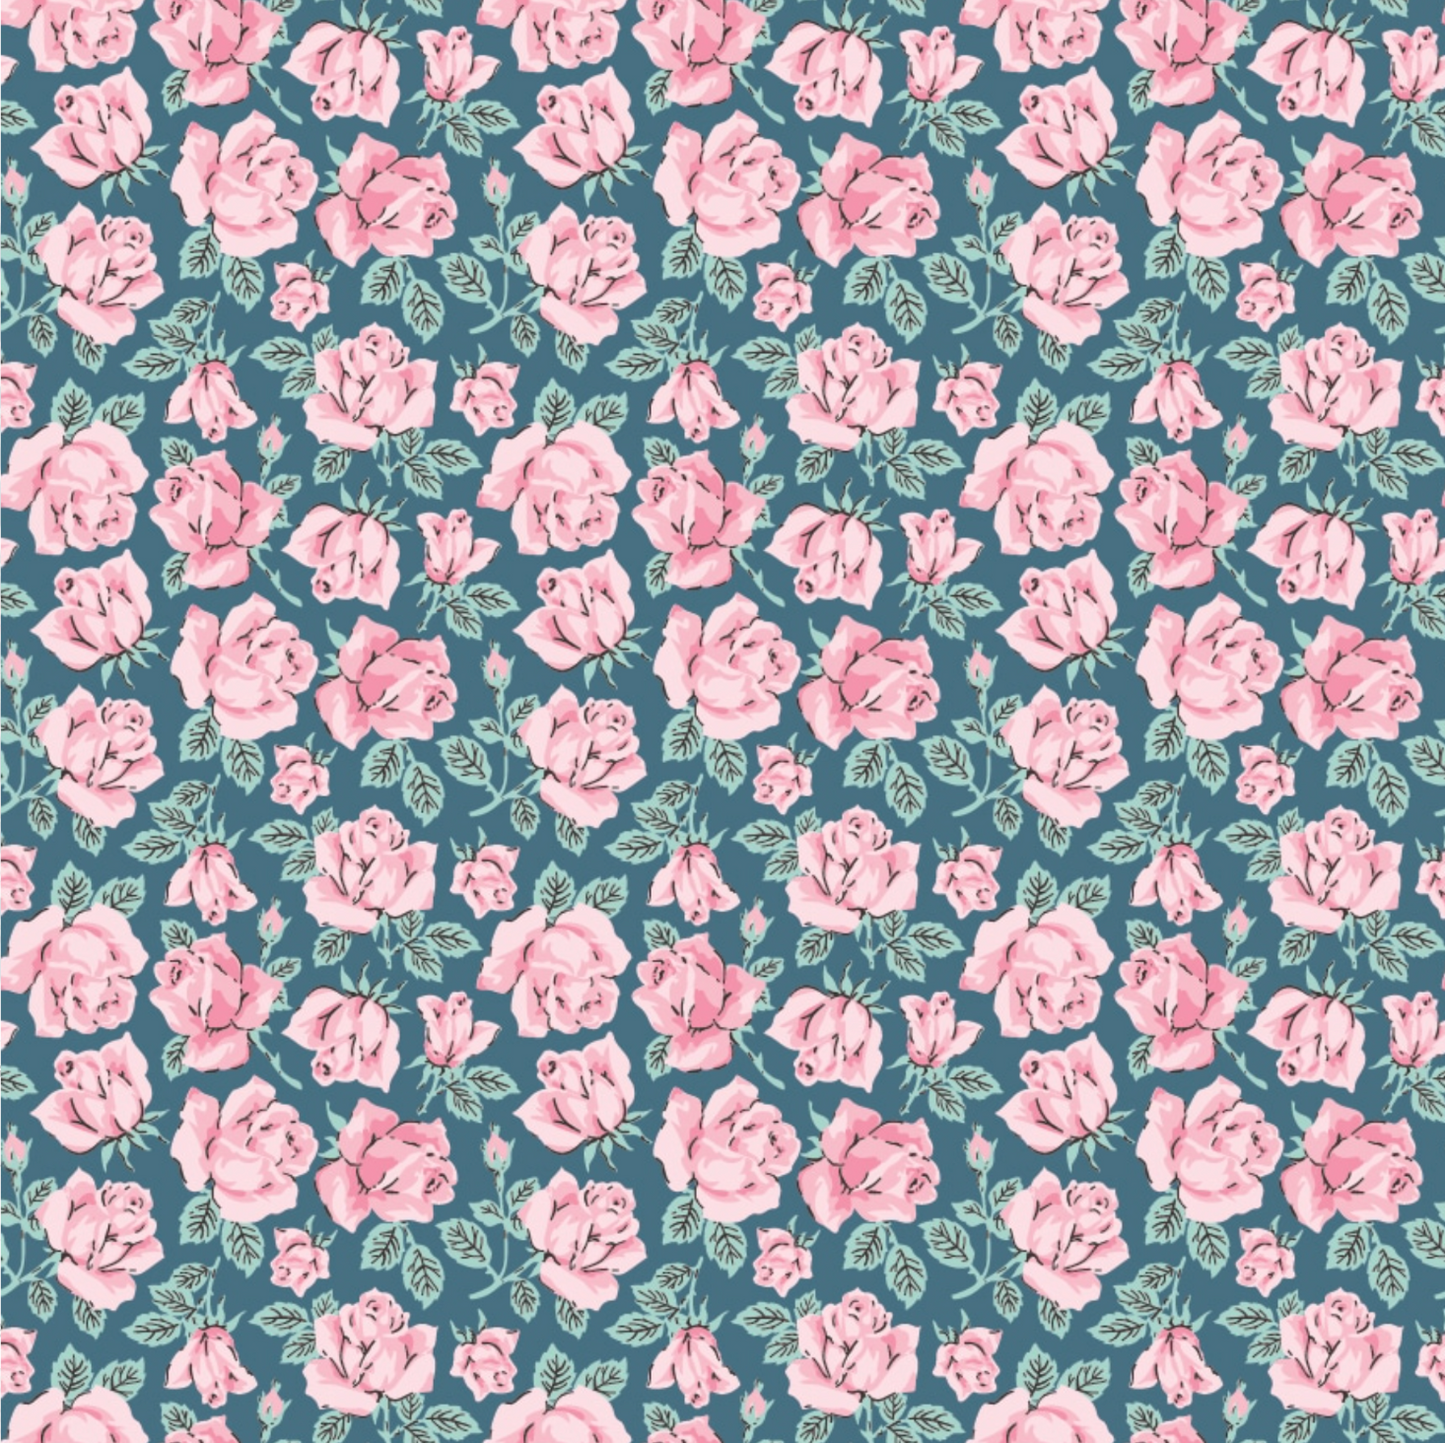 Delightful Department Store Carols Roses Teal DS23205, sold by the 1/2 yard